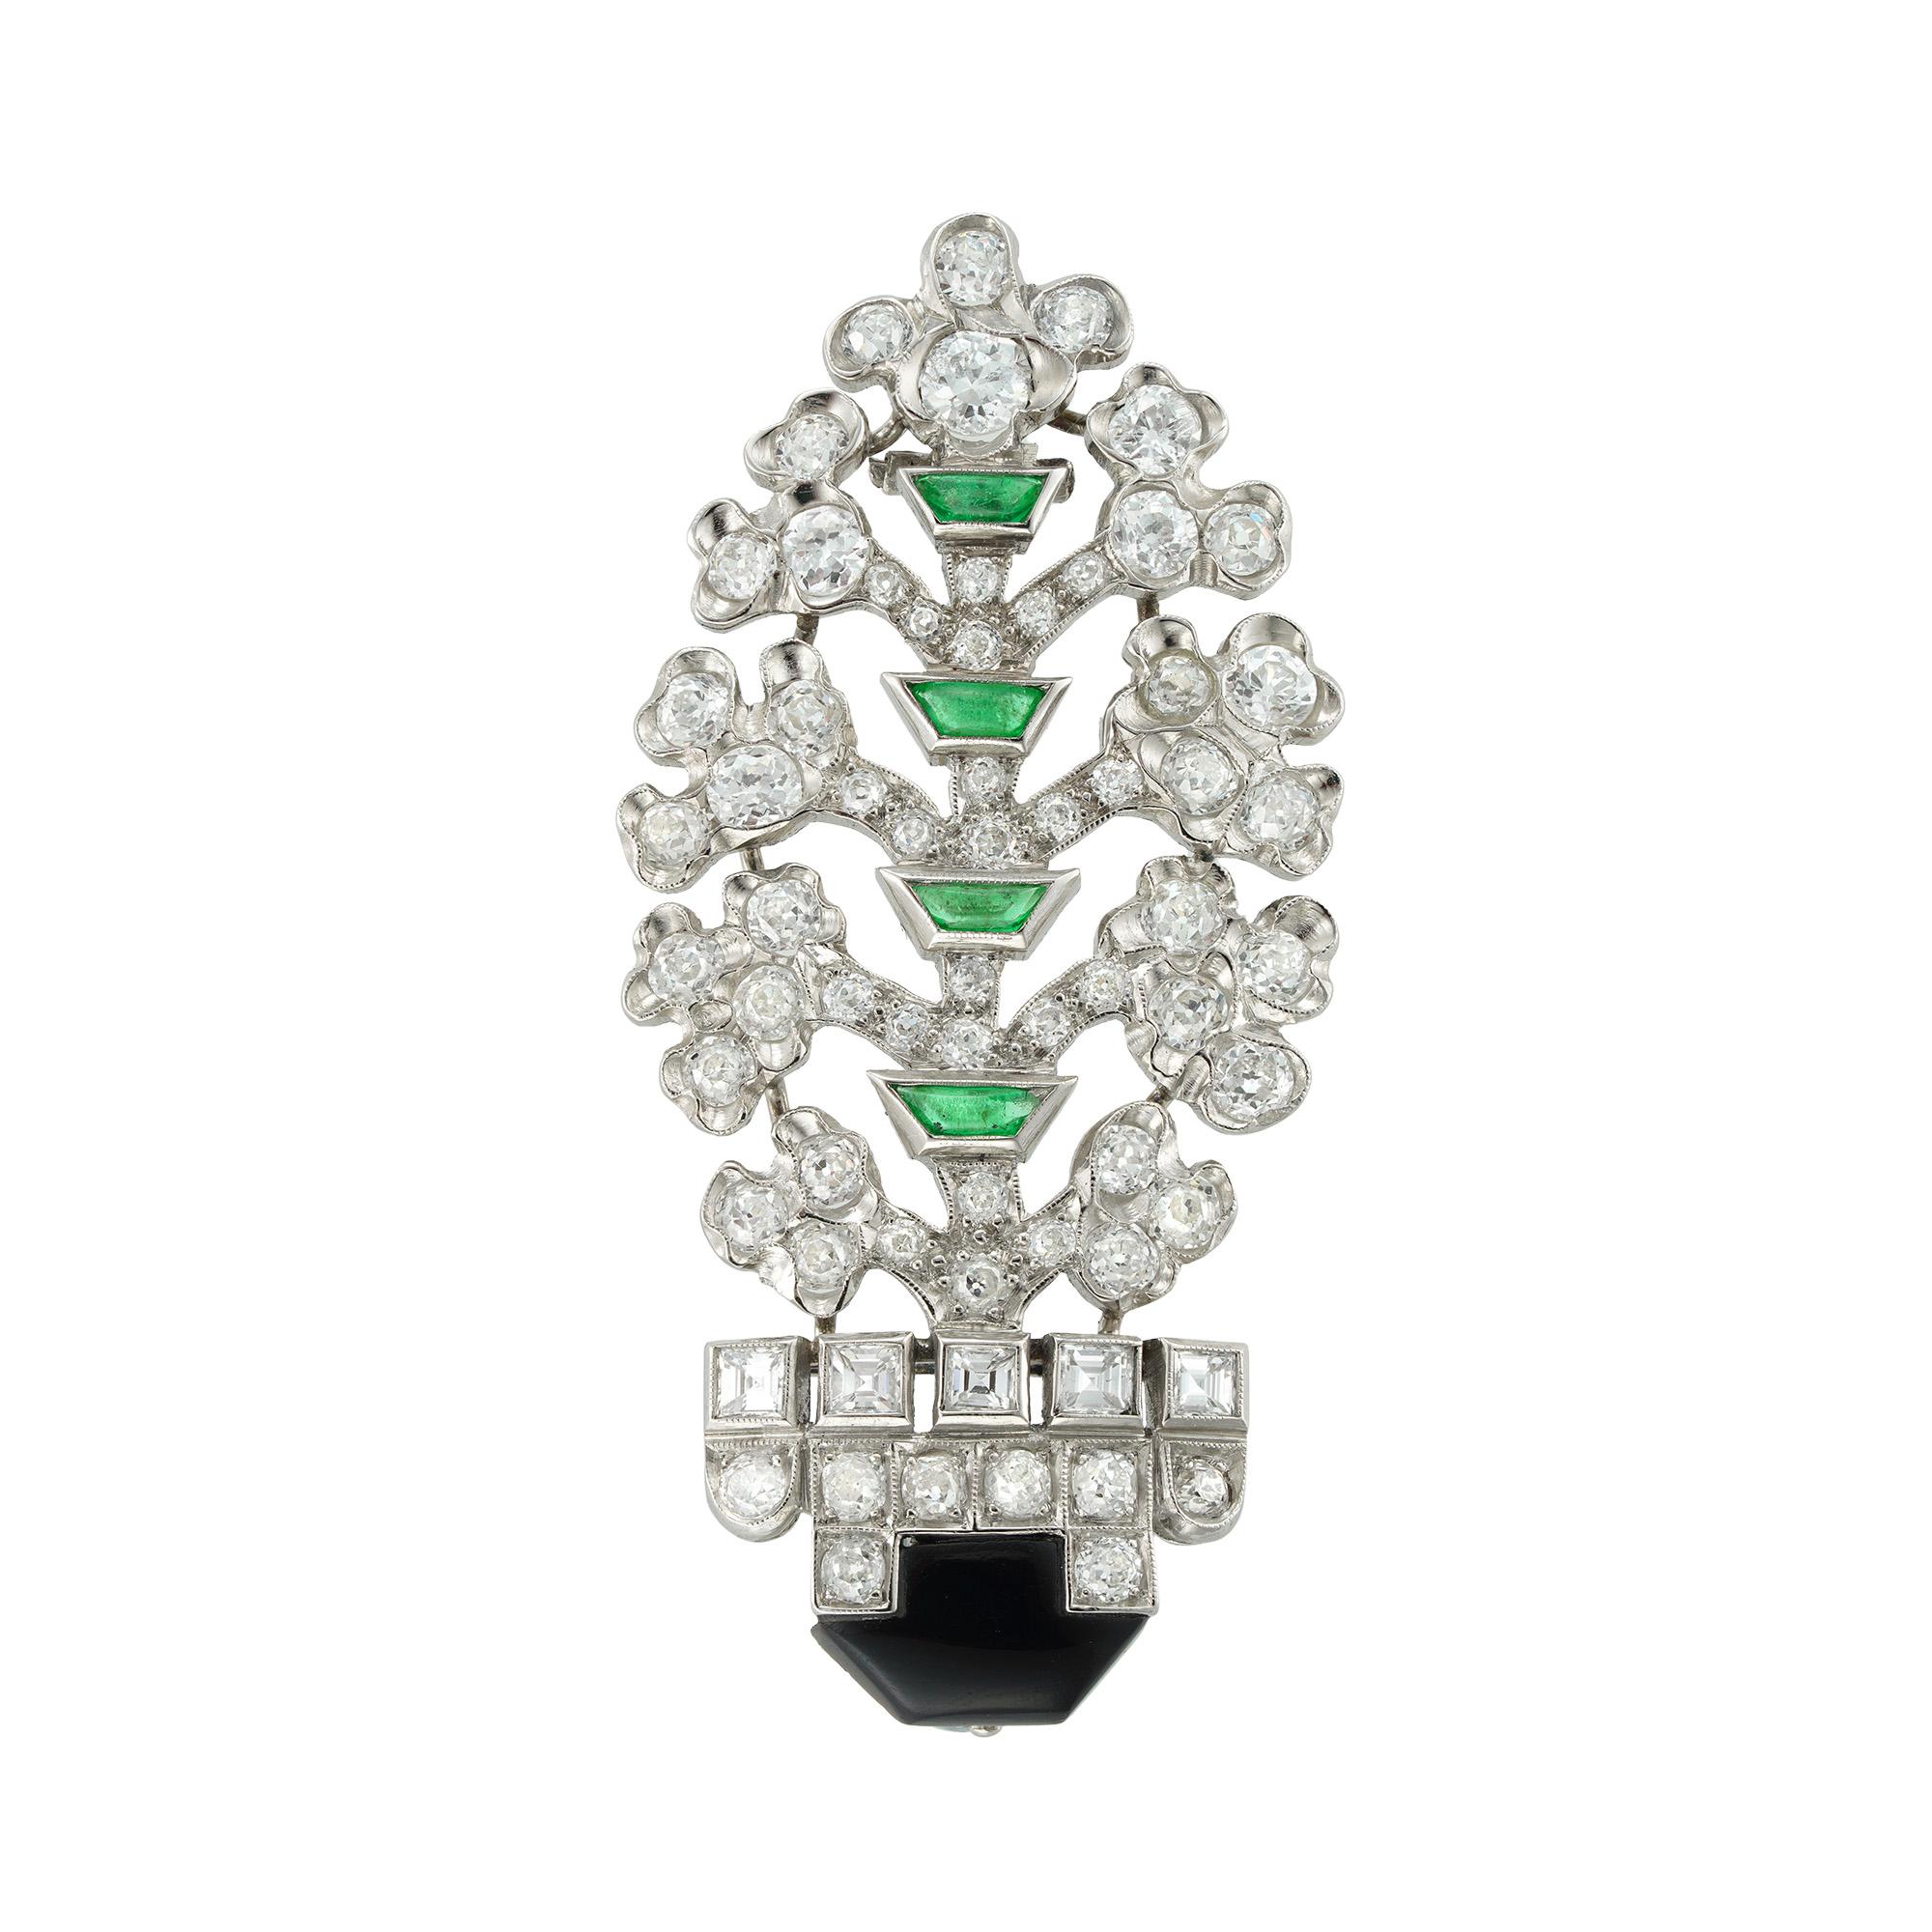 An Art Deco diamond, onyx and emerald giardinetto brooch, the pot formed by an onyx embellished with eight old-cut diamonds, the rim flanked with five carre-cut diamonds, the trunk of the tree formed by four trapeze shaped cabochon-cut emeralds and